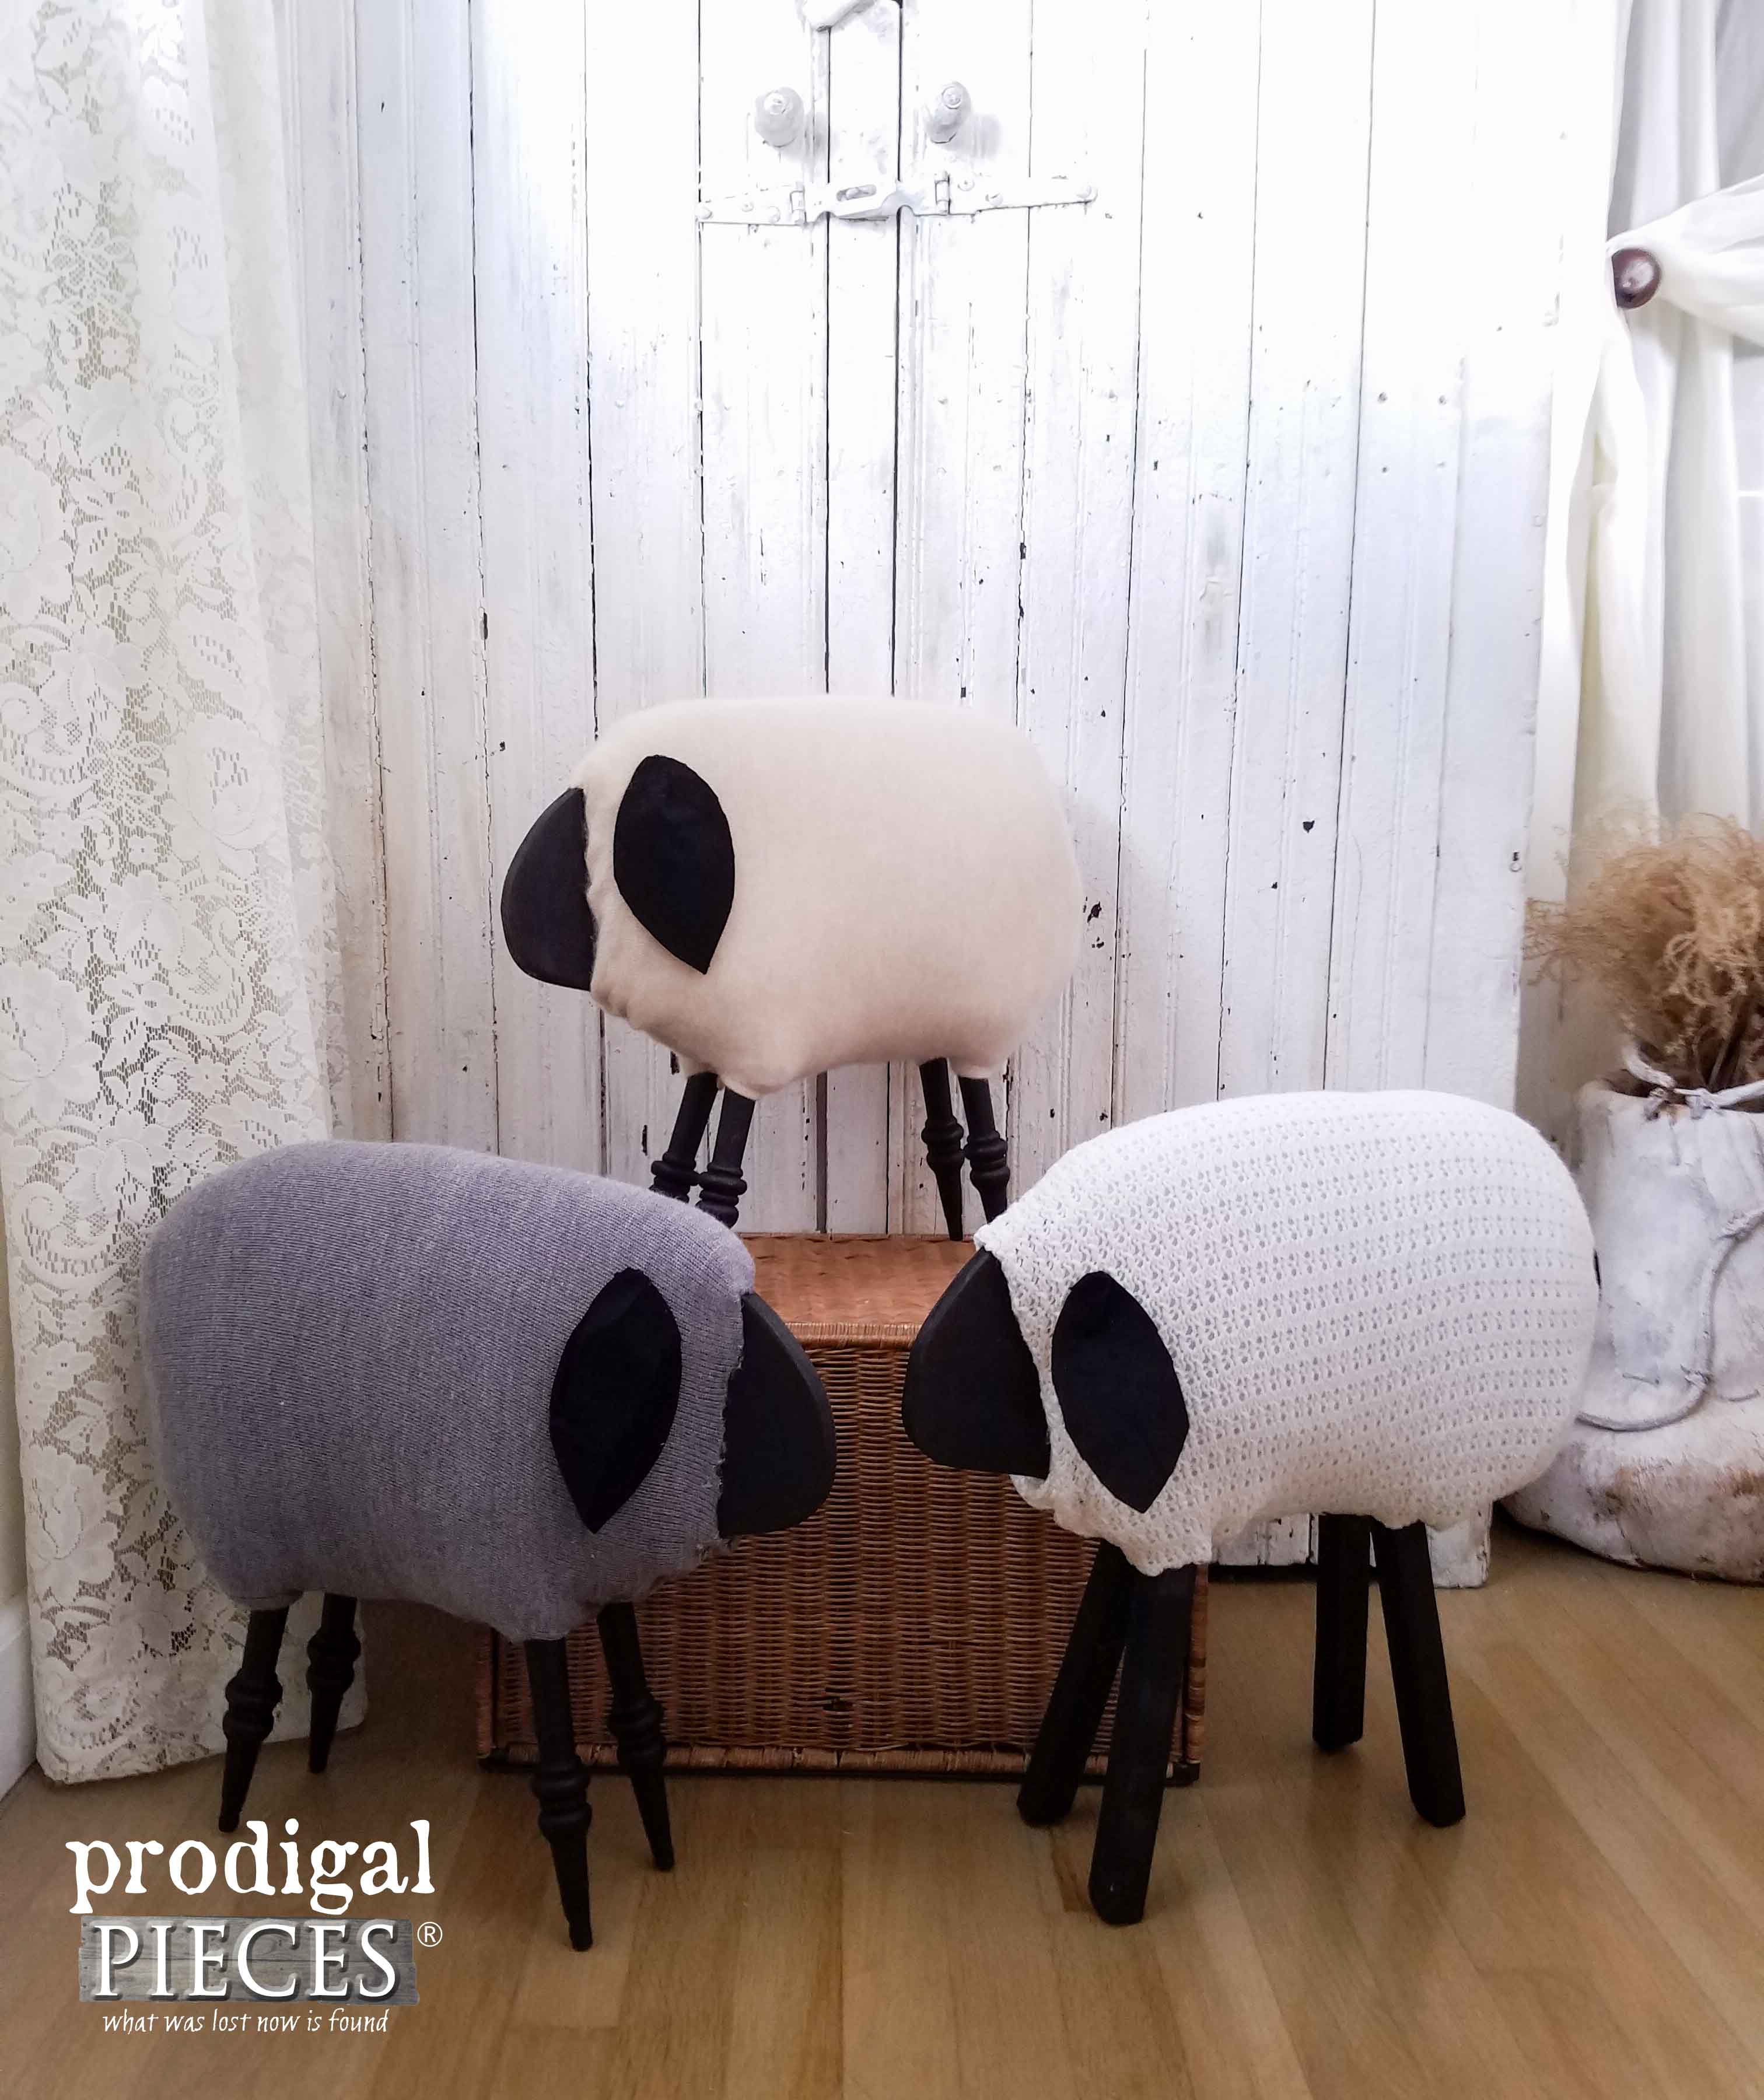 Upcycled Woolly Sheep by Prodigal Pieces | prodigalpieces.com